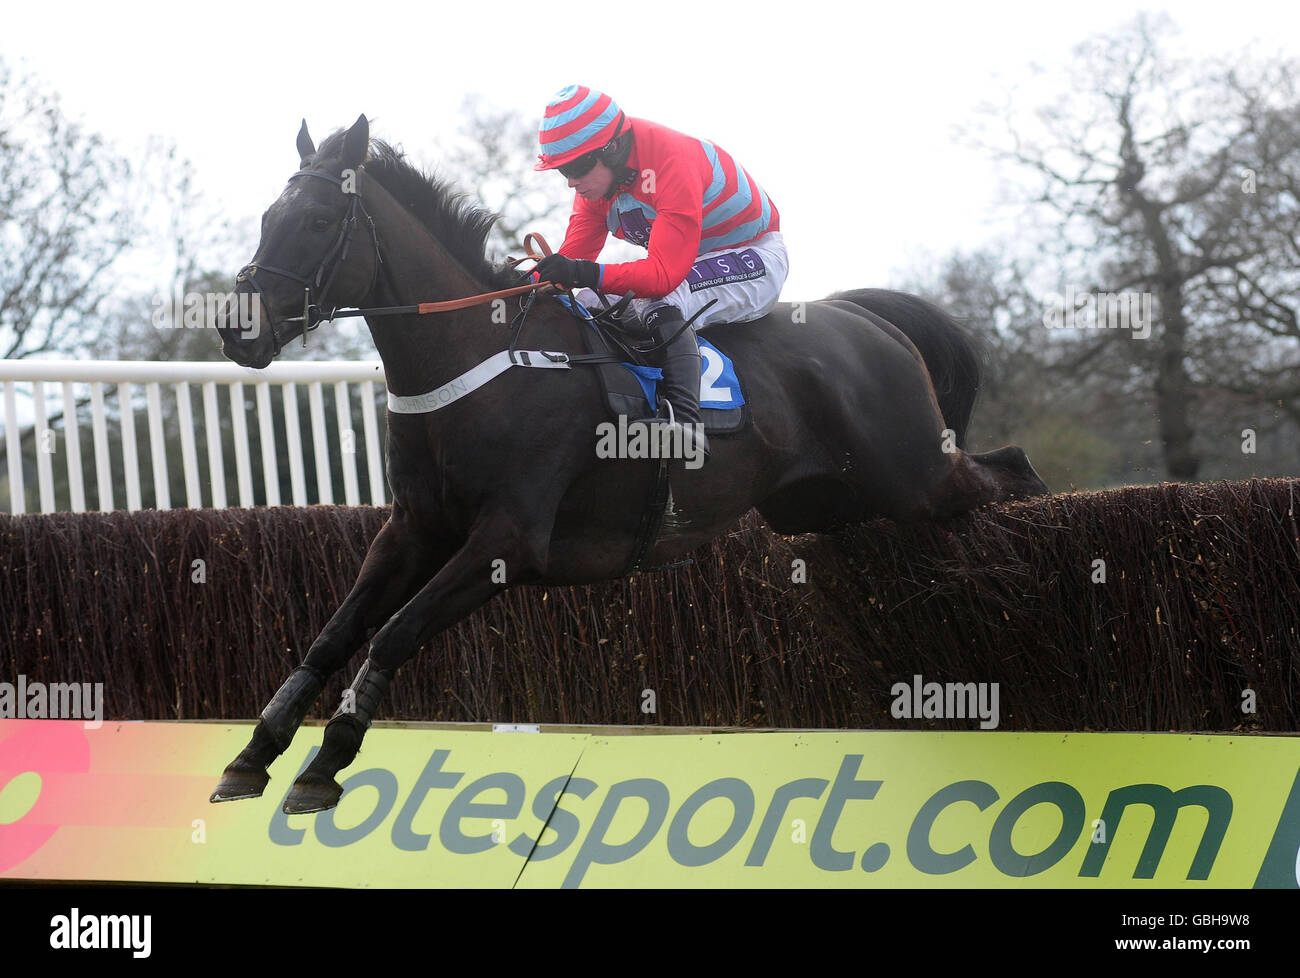 Horse Racing - Wetherby Racecourse Foto Stock